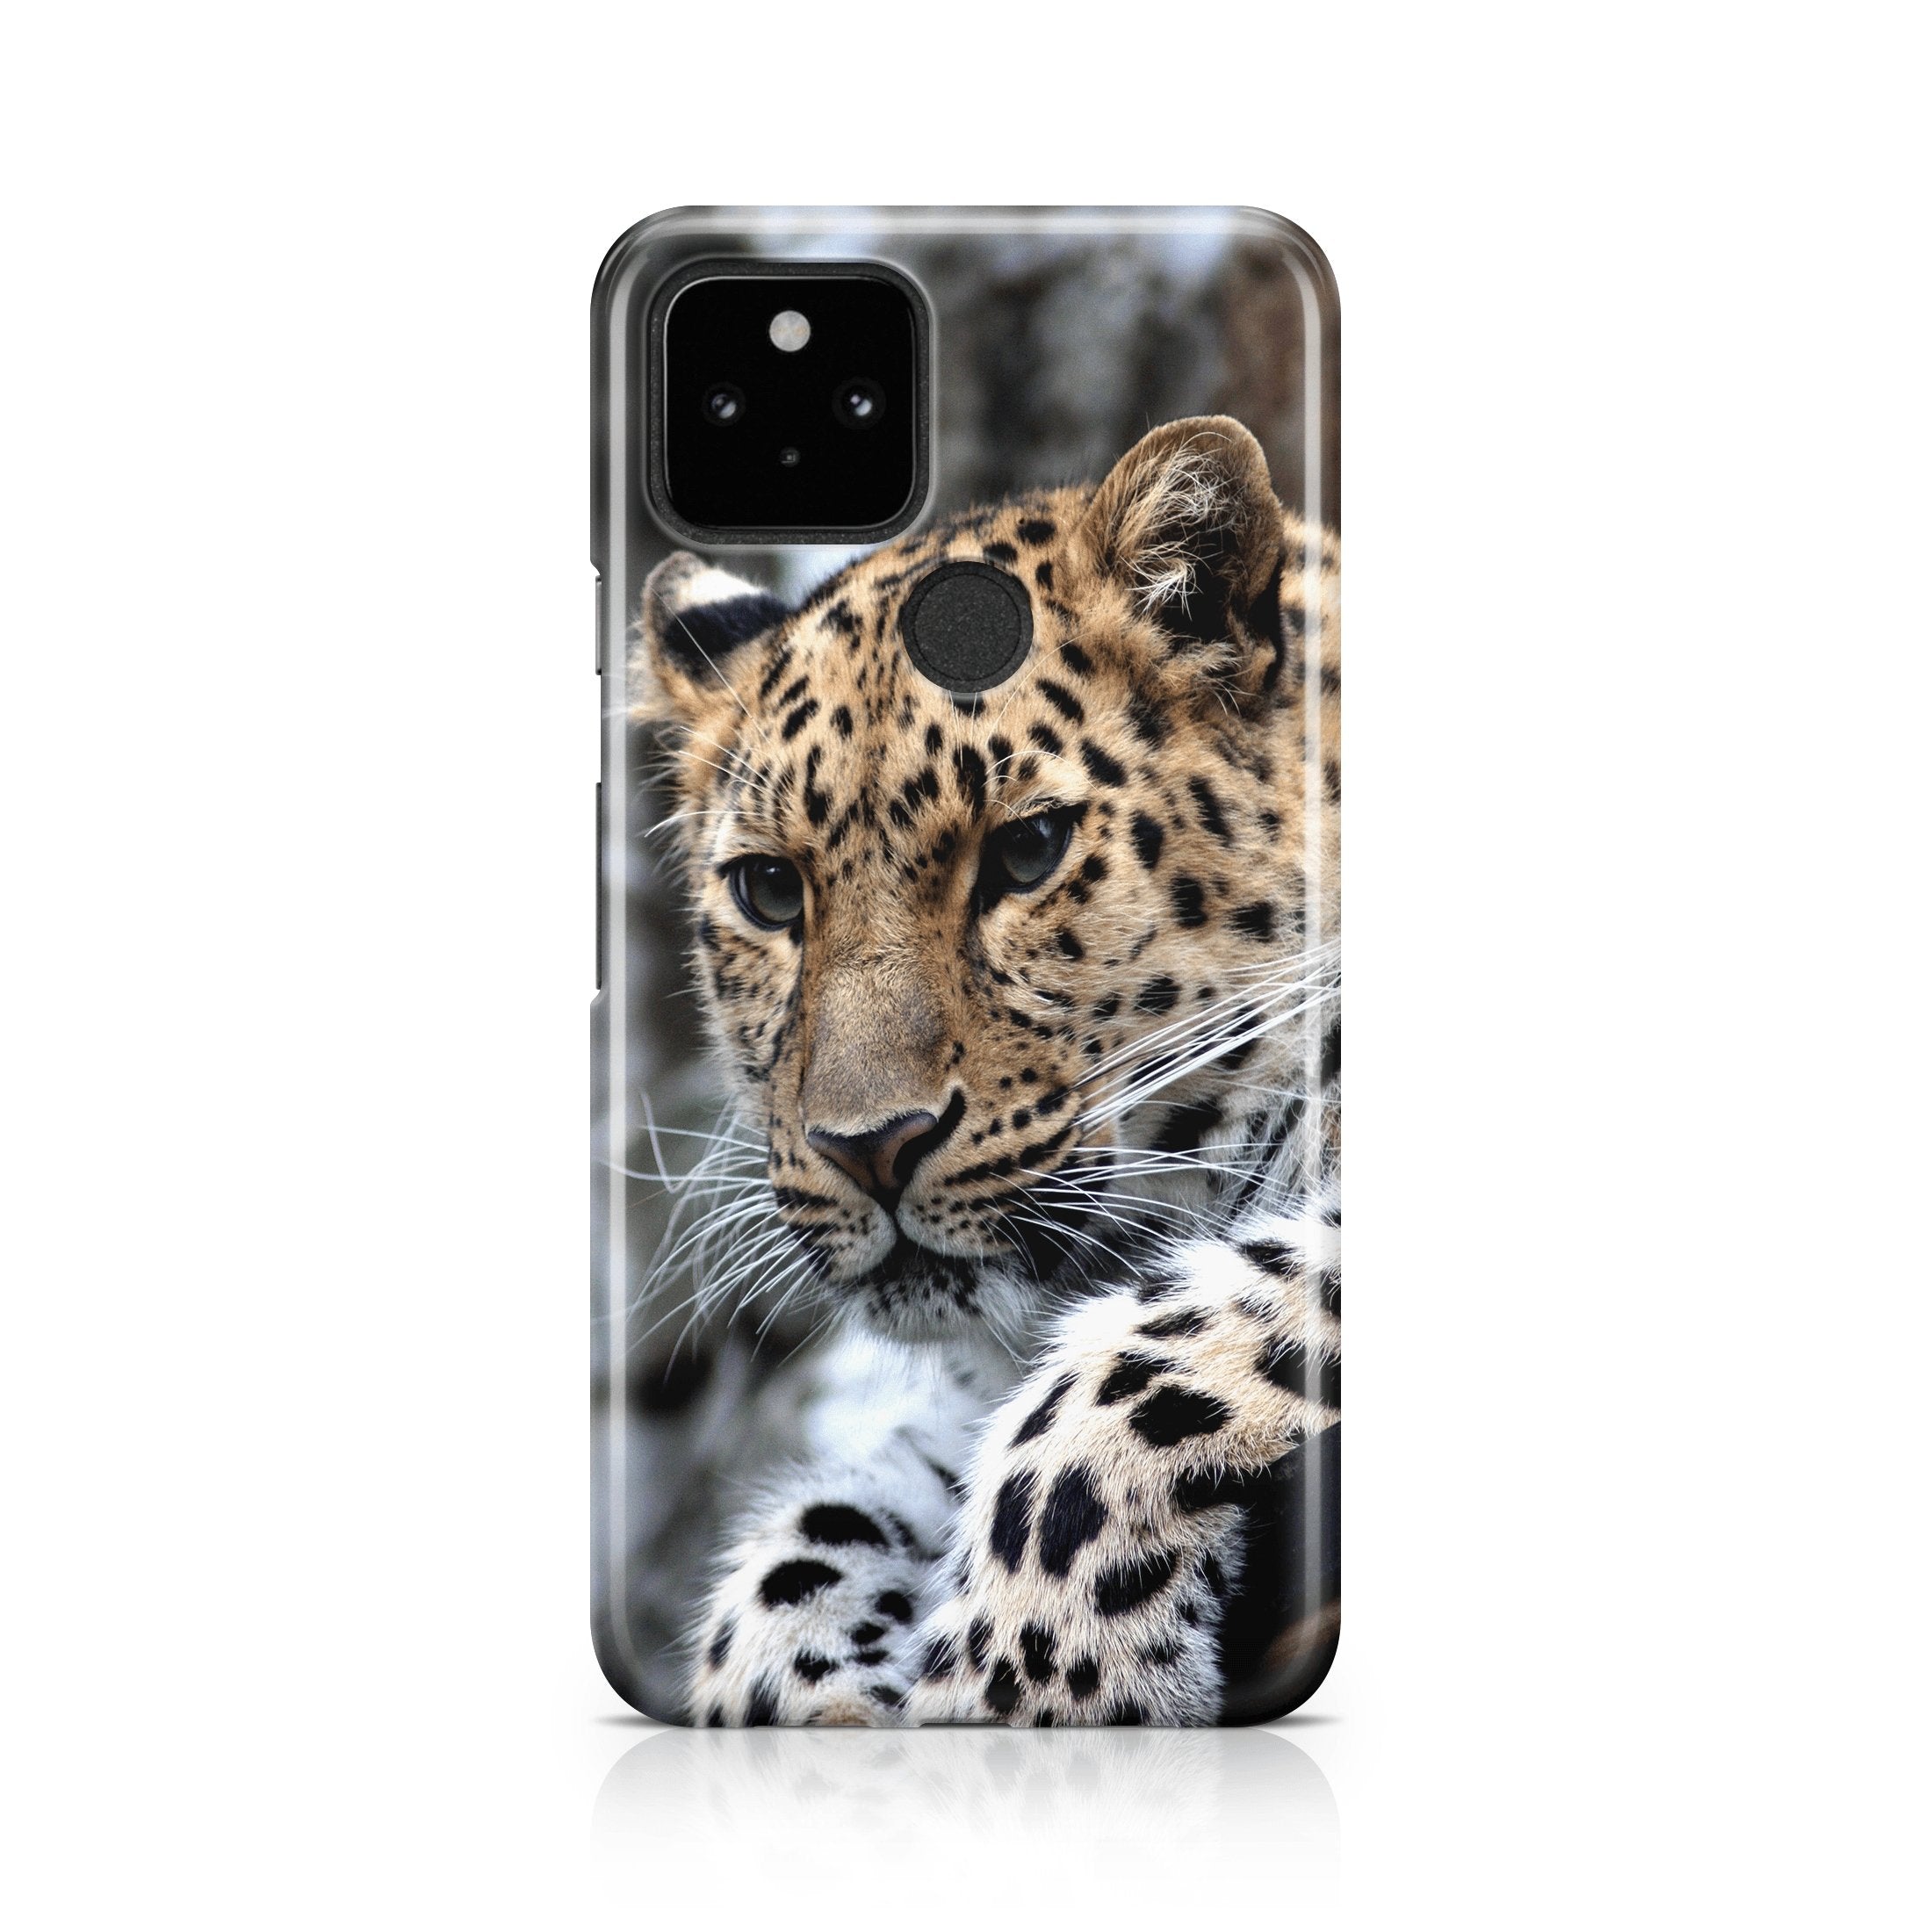 Leopard I - Google phone case designs by CaseSwagger